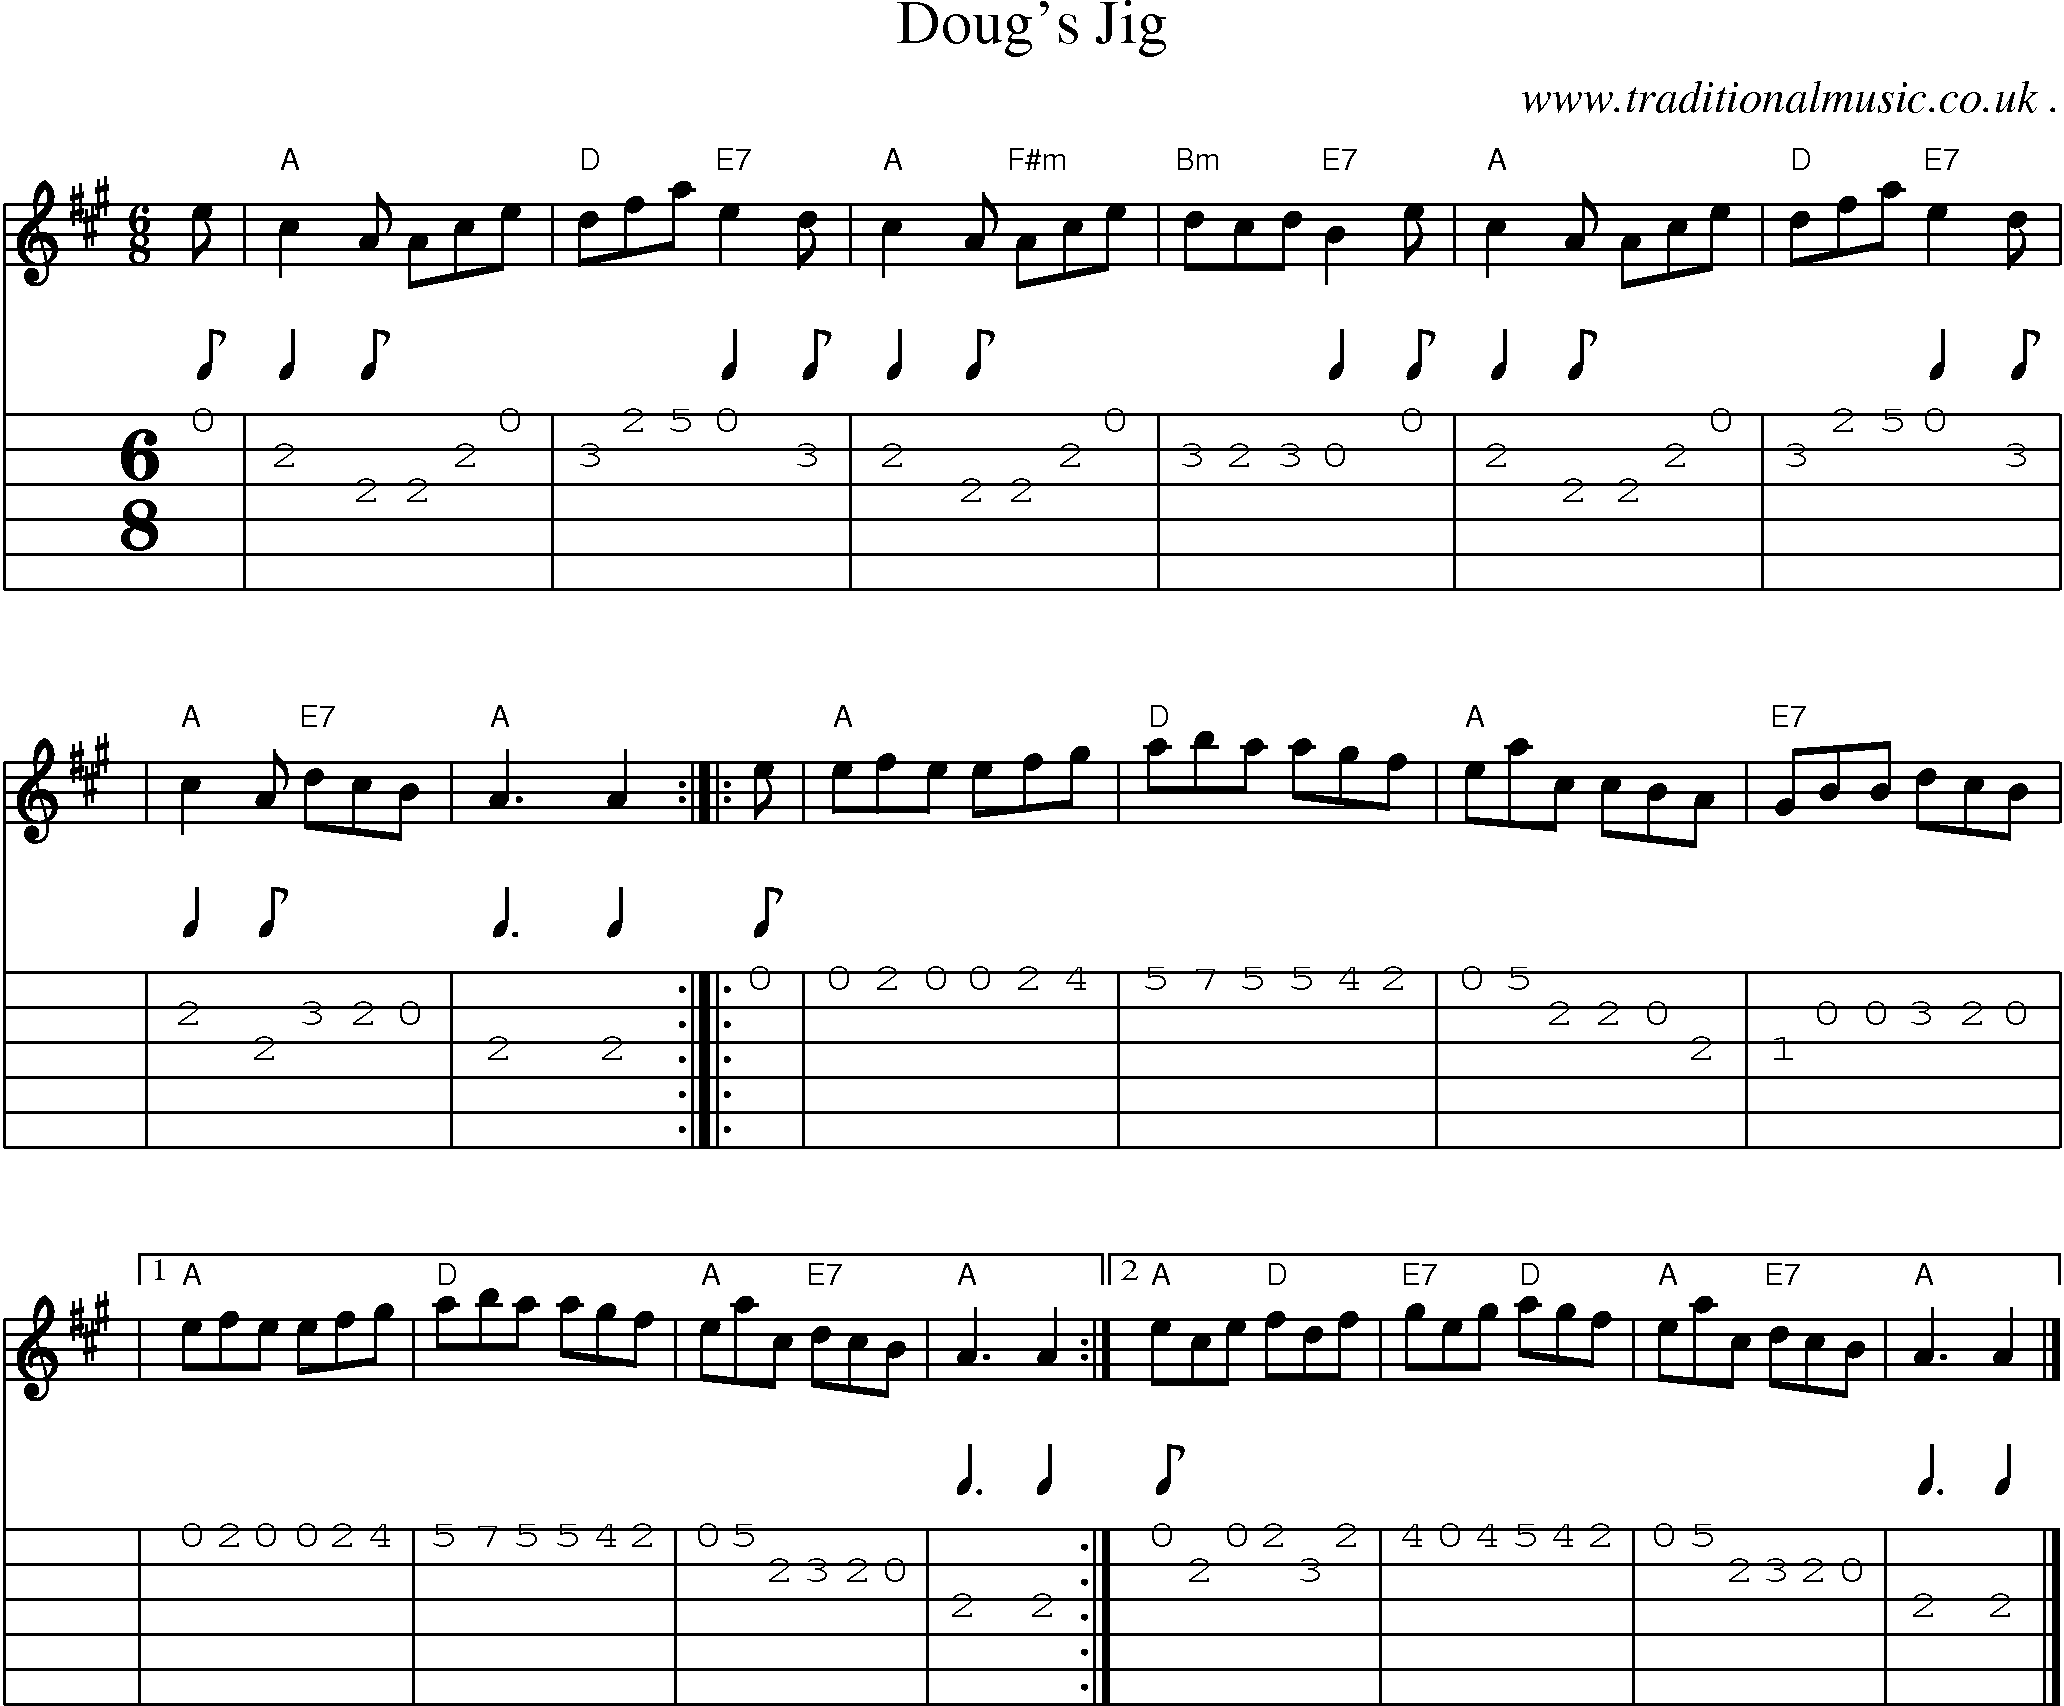 Sheet-music  score, Chords and Guitar Tabs for Dougs Jig